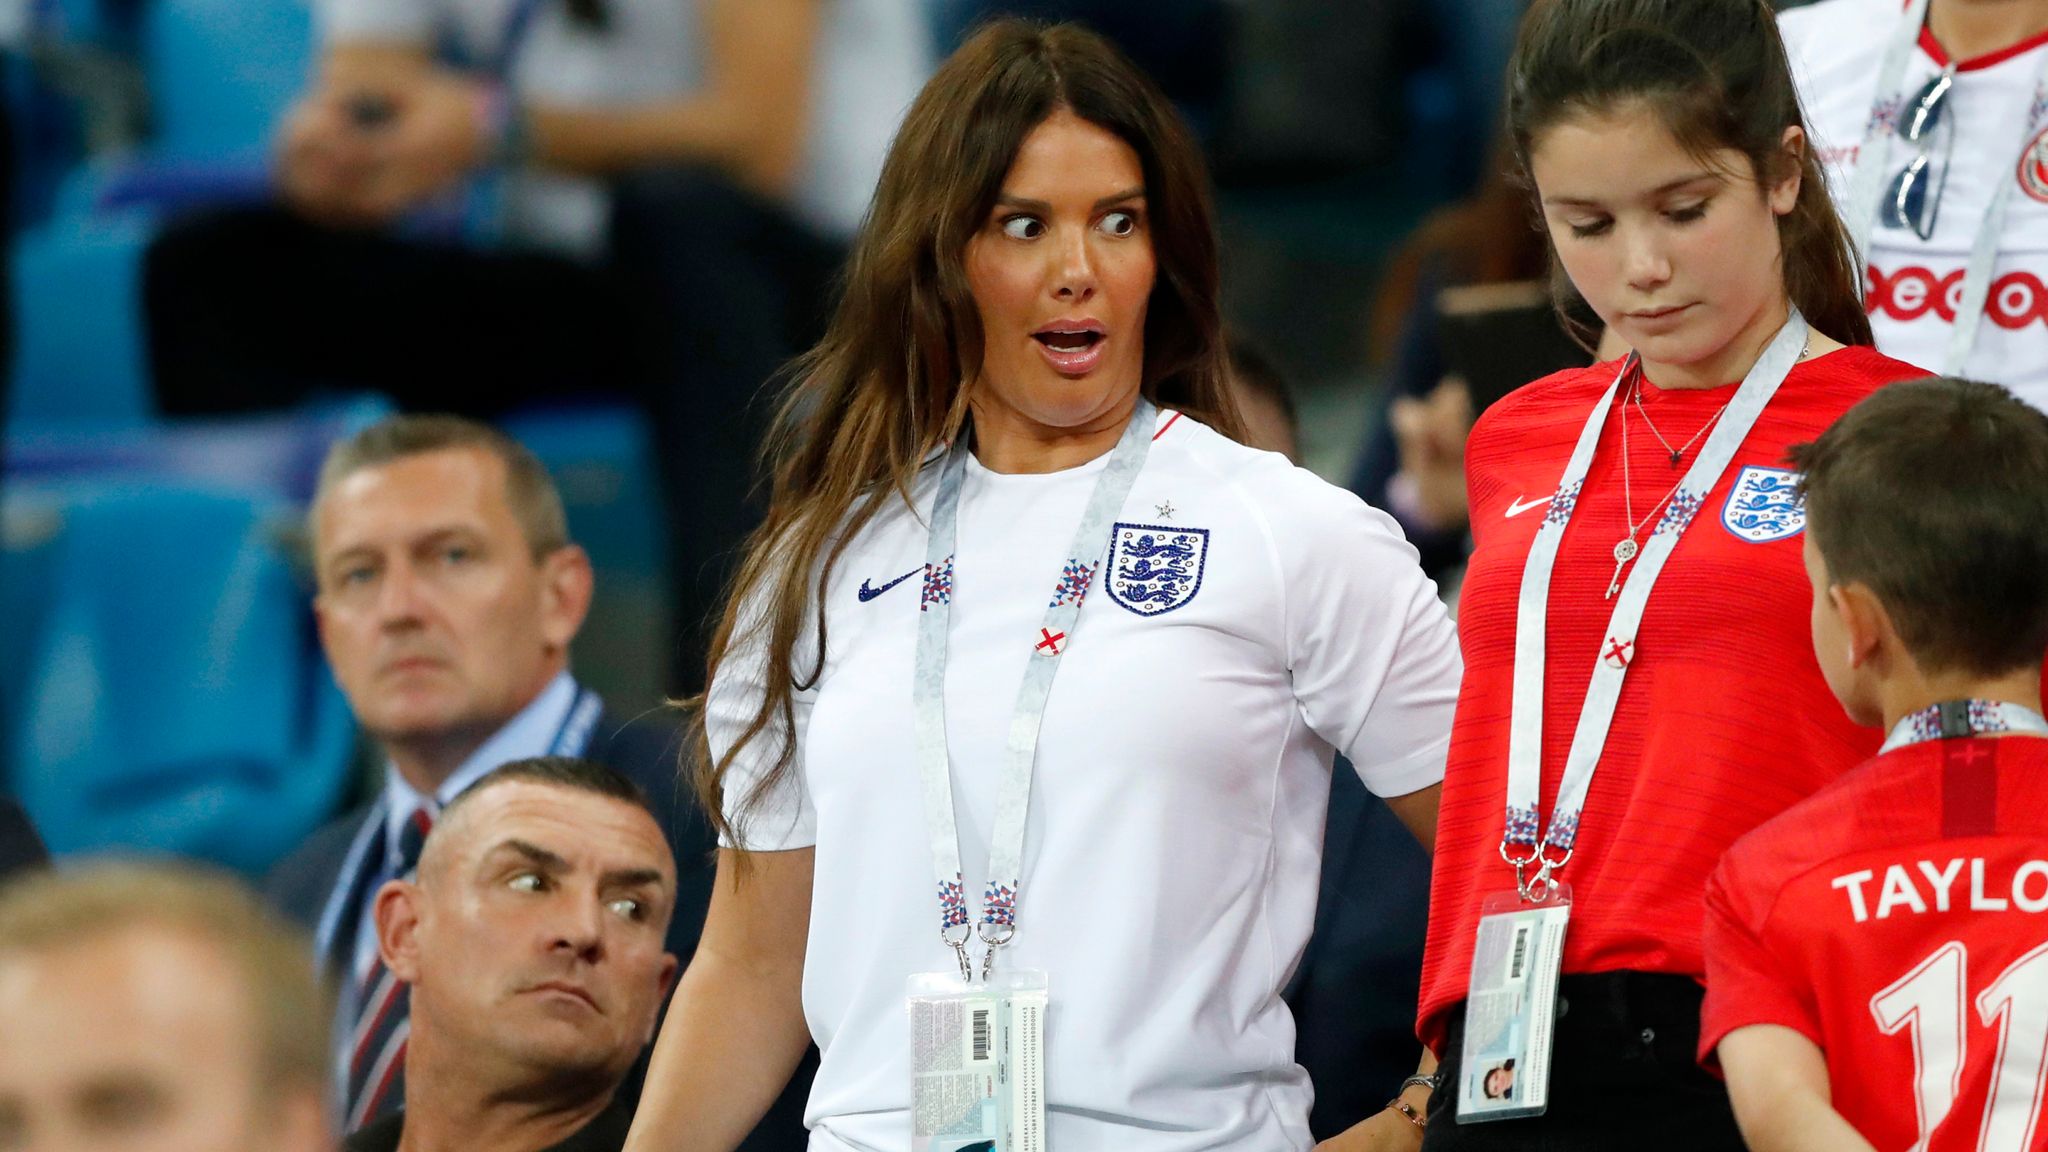 Rebekah Vardy at the Tunisia and England match during the 2018 World Cup. Pic: AP